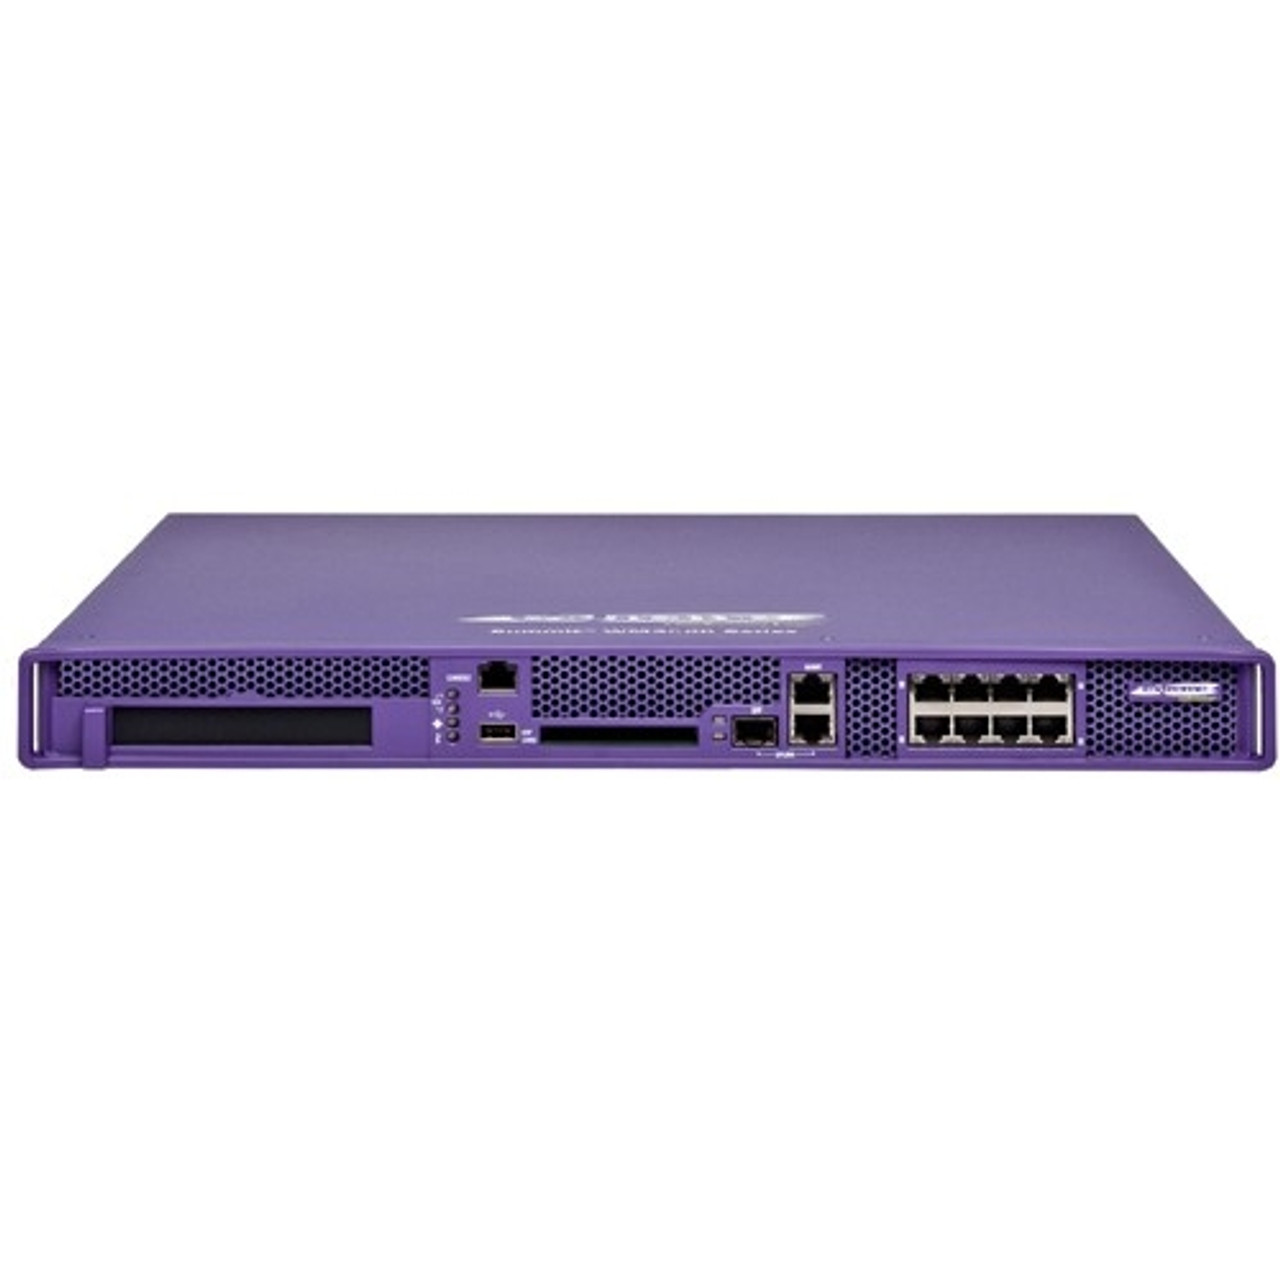 15714 Extreme Networks Summit 8 x 10/100/1000Mbps (PoE) 2 x Expansion Slots 1 x SFP(min-GBIC) WLAN Controller (Refurbished)